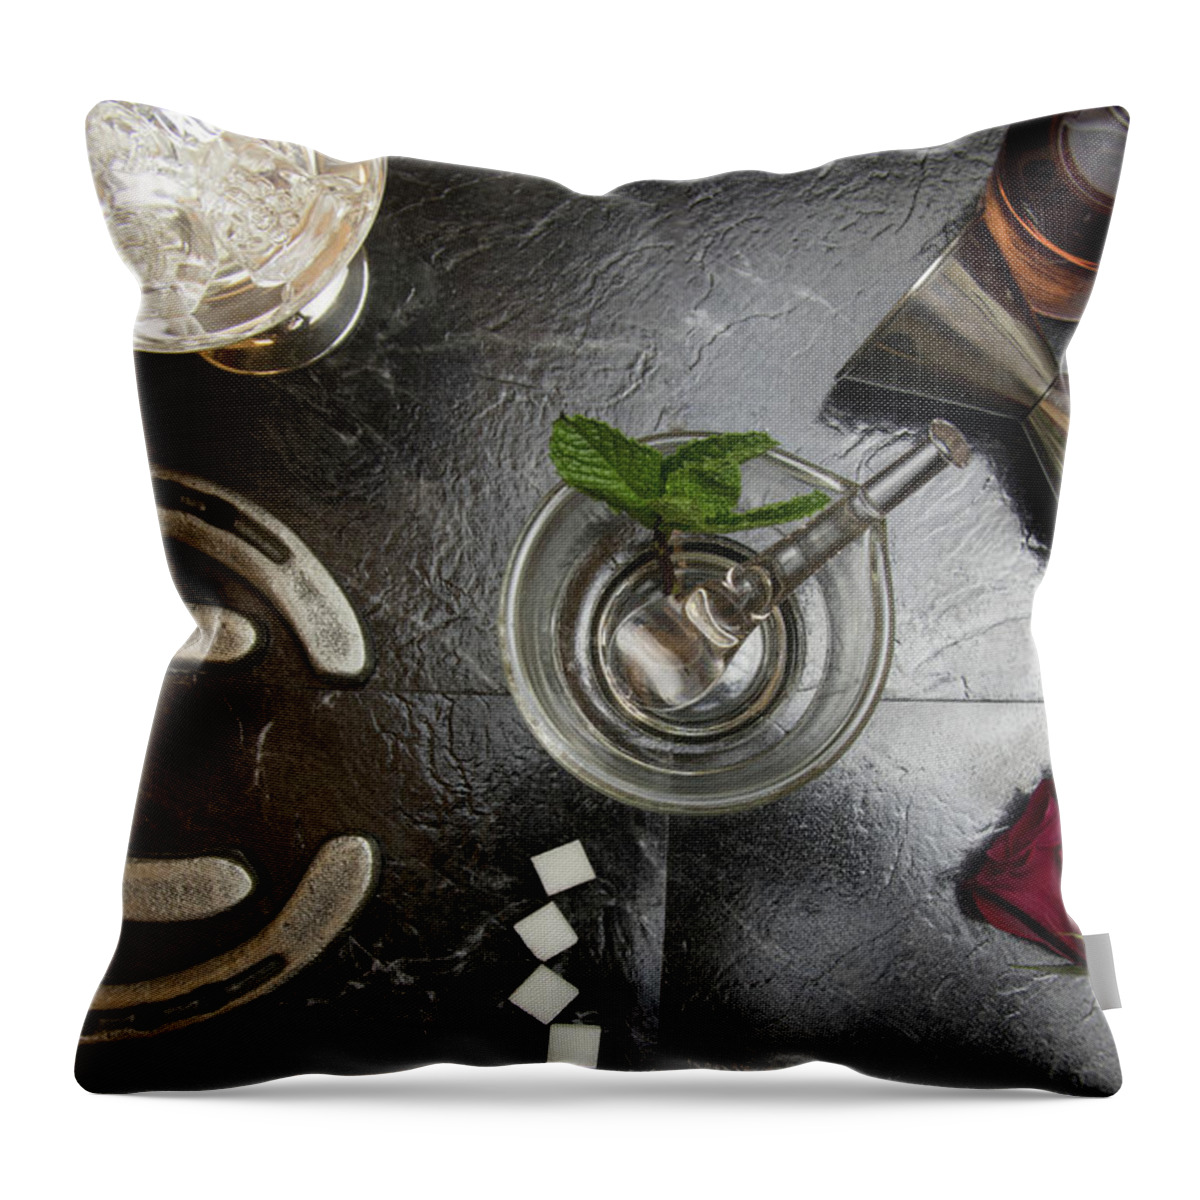 Above Throw Pillow featuring the photograph Lay flat of deconstructed mint julep by Karen Foley